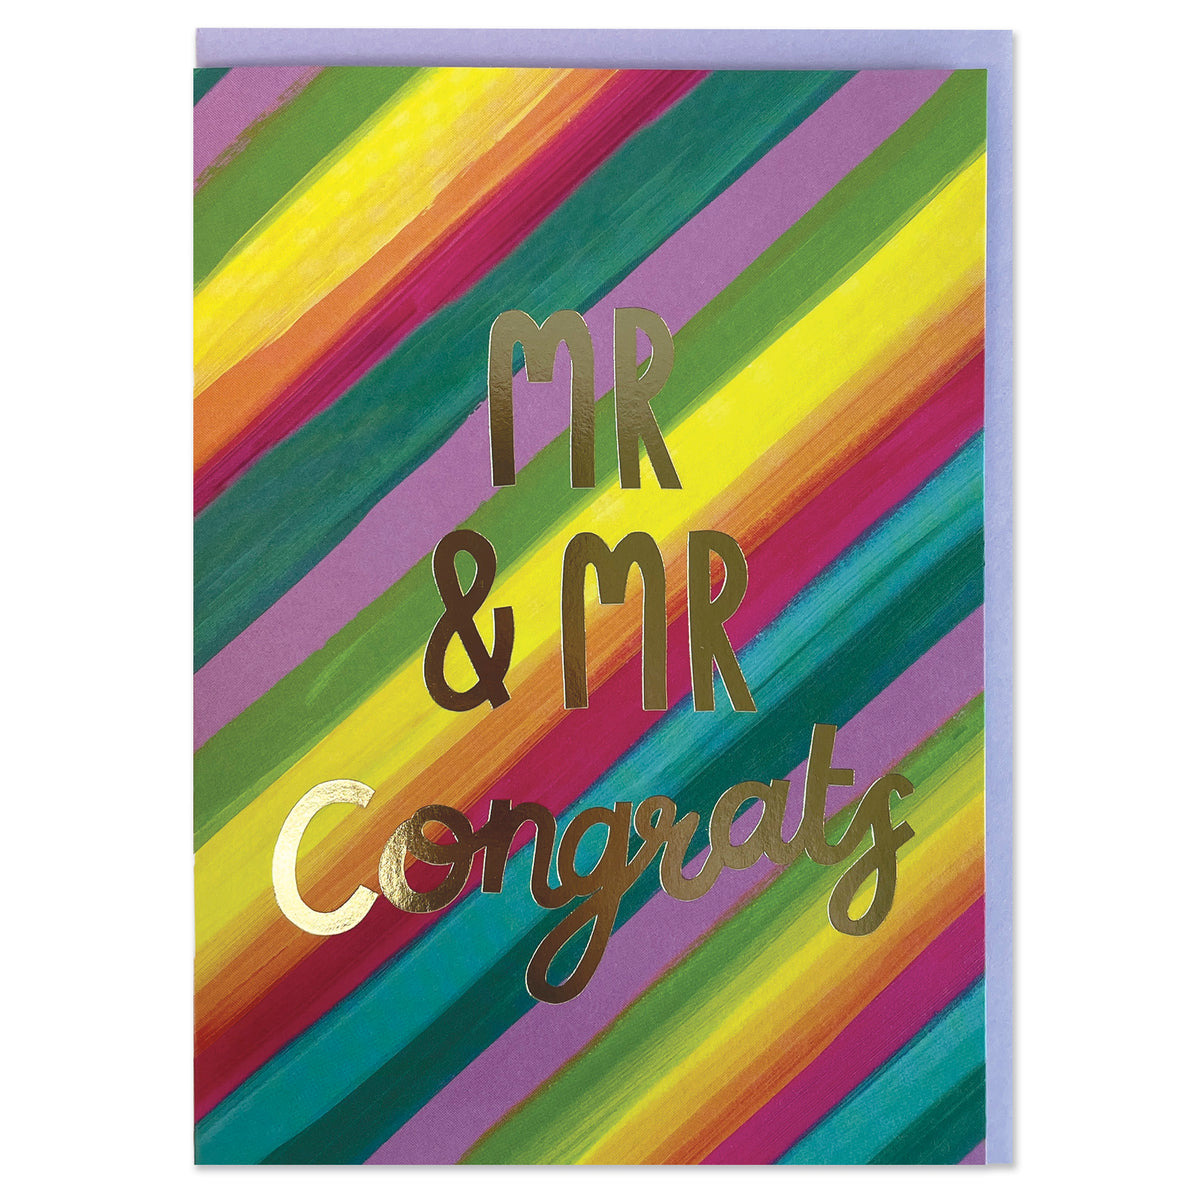 A colourful rainbow stripe greetings card to celebrate a wedding. The rainbow stripes are diagonal across the card and the writing in the centre of the card is big gold foil stating &#39;Mr &amp; Mr Congrats&#39;.